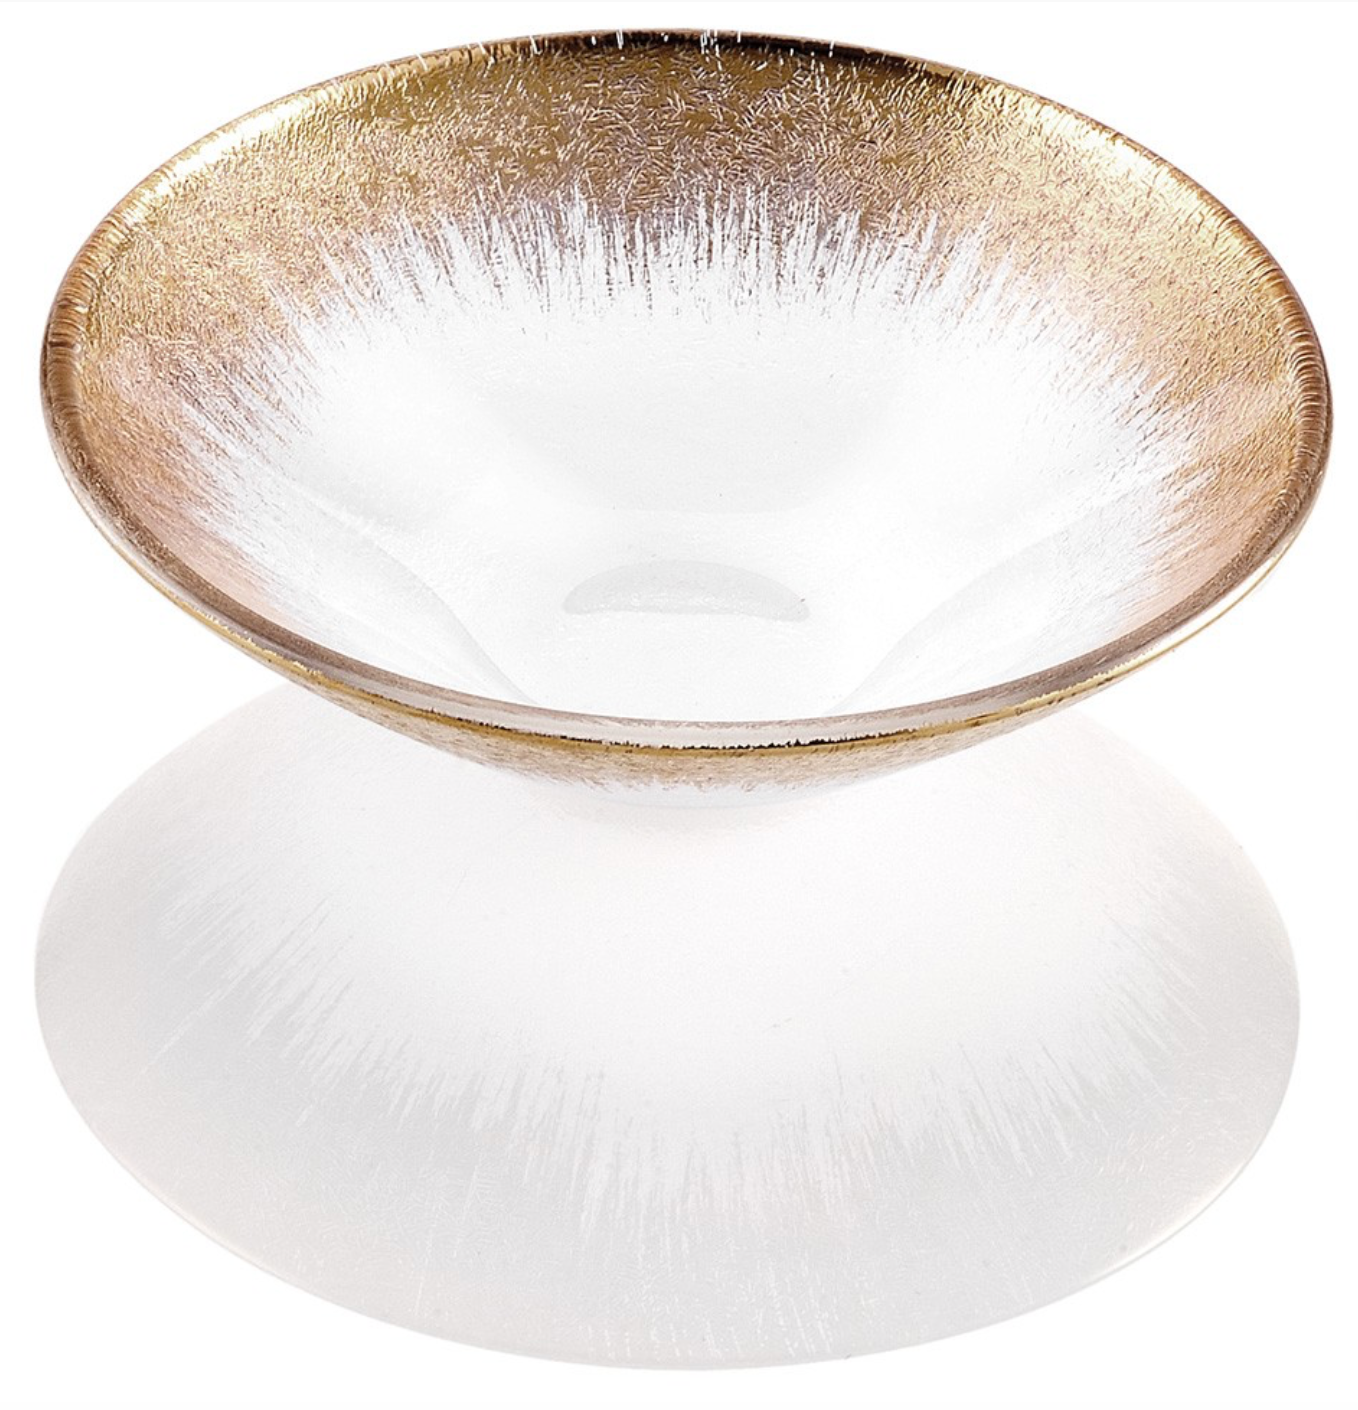 IVV Orizzonte Individual Bowl 19cm Clear Gold Decoration